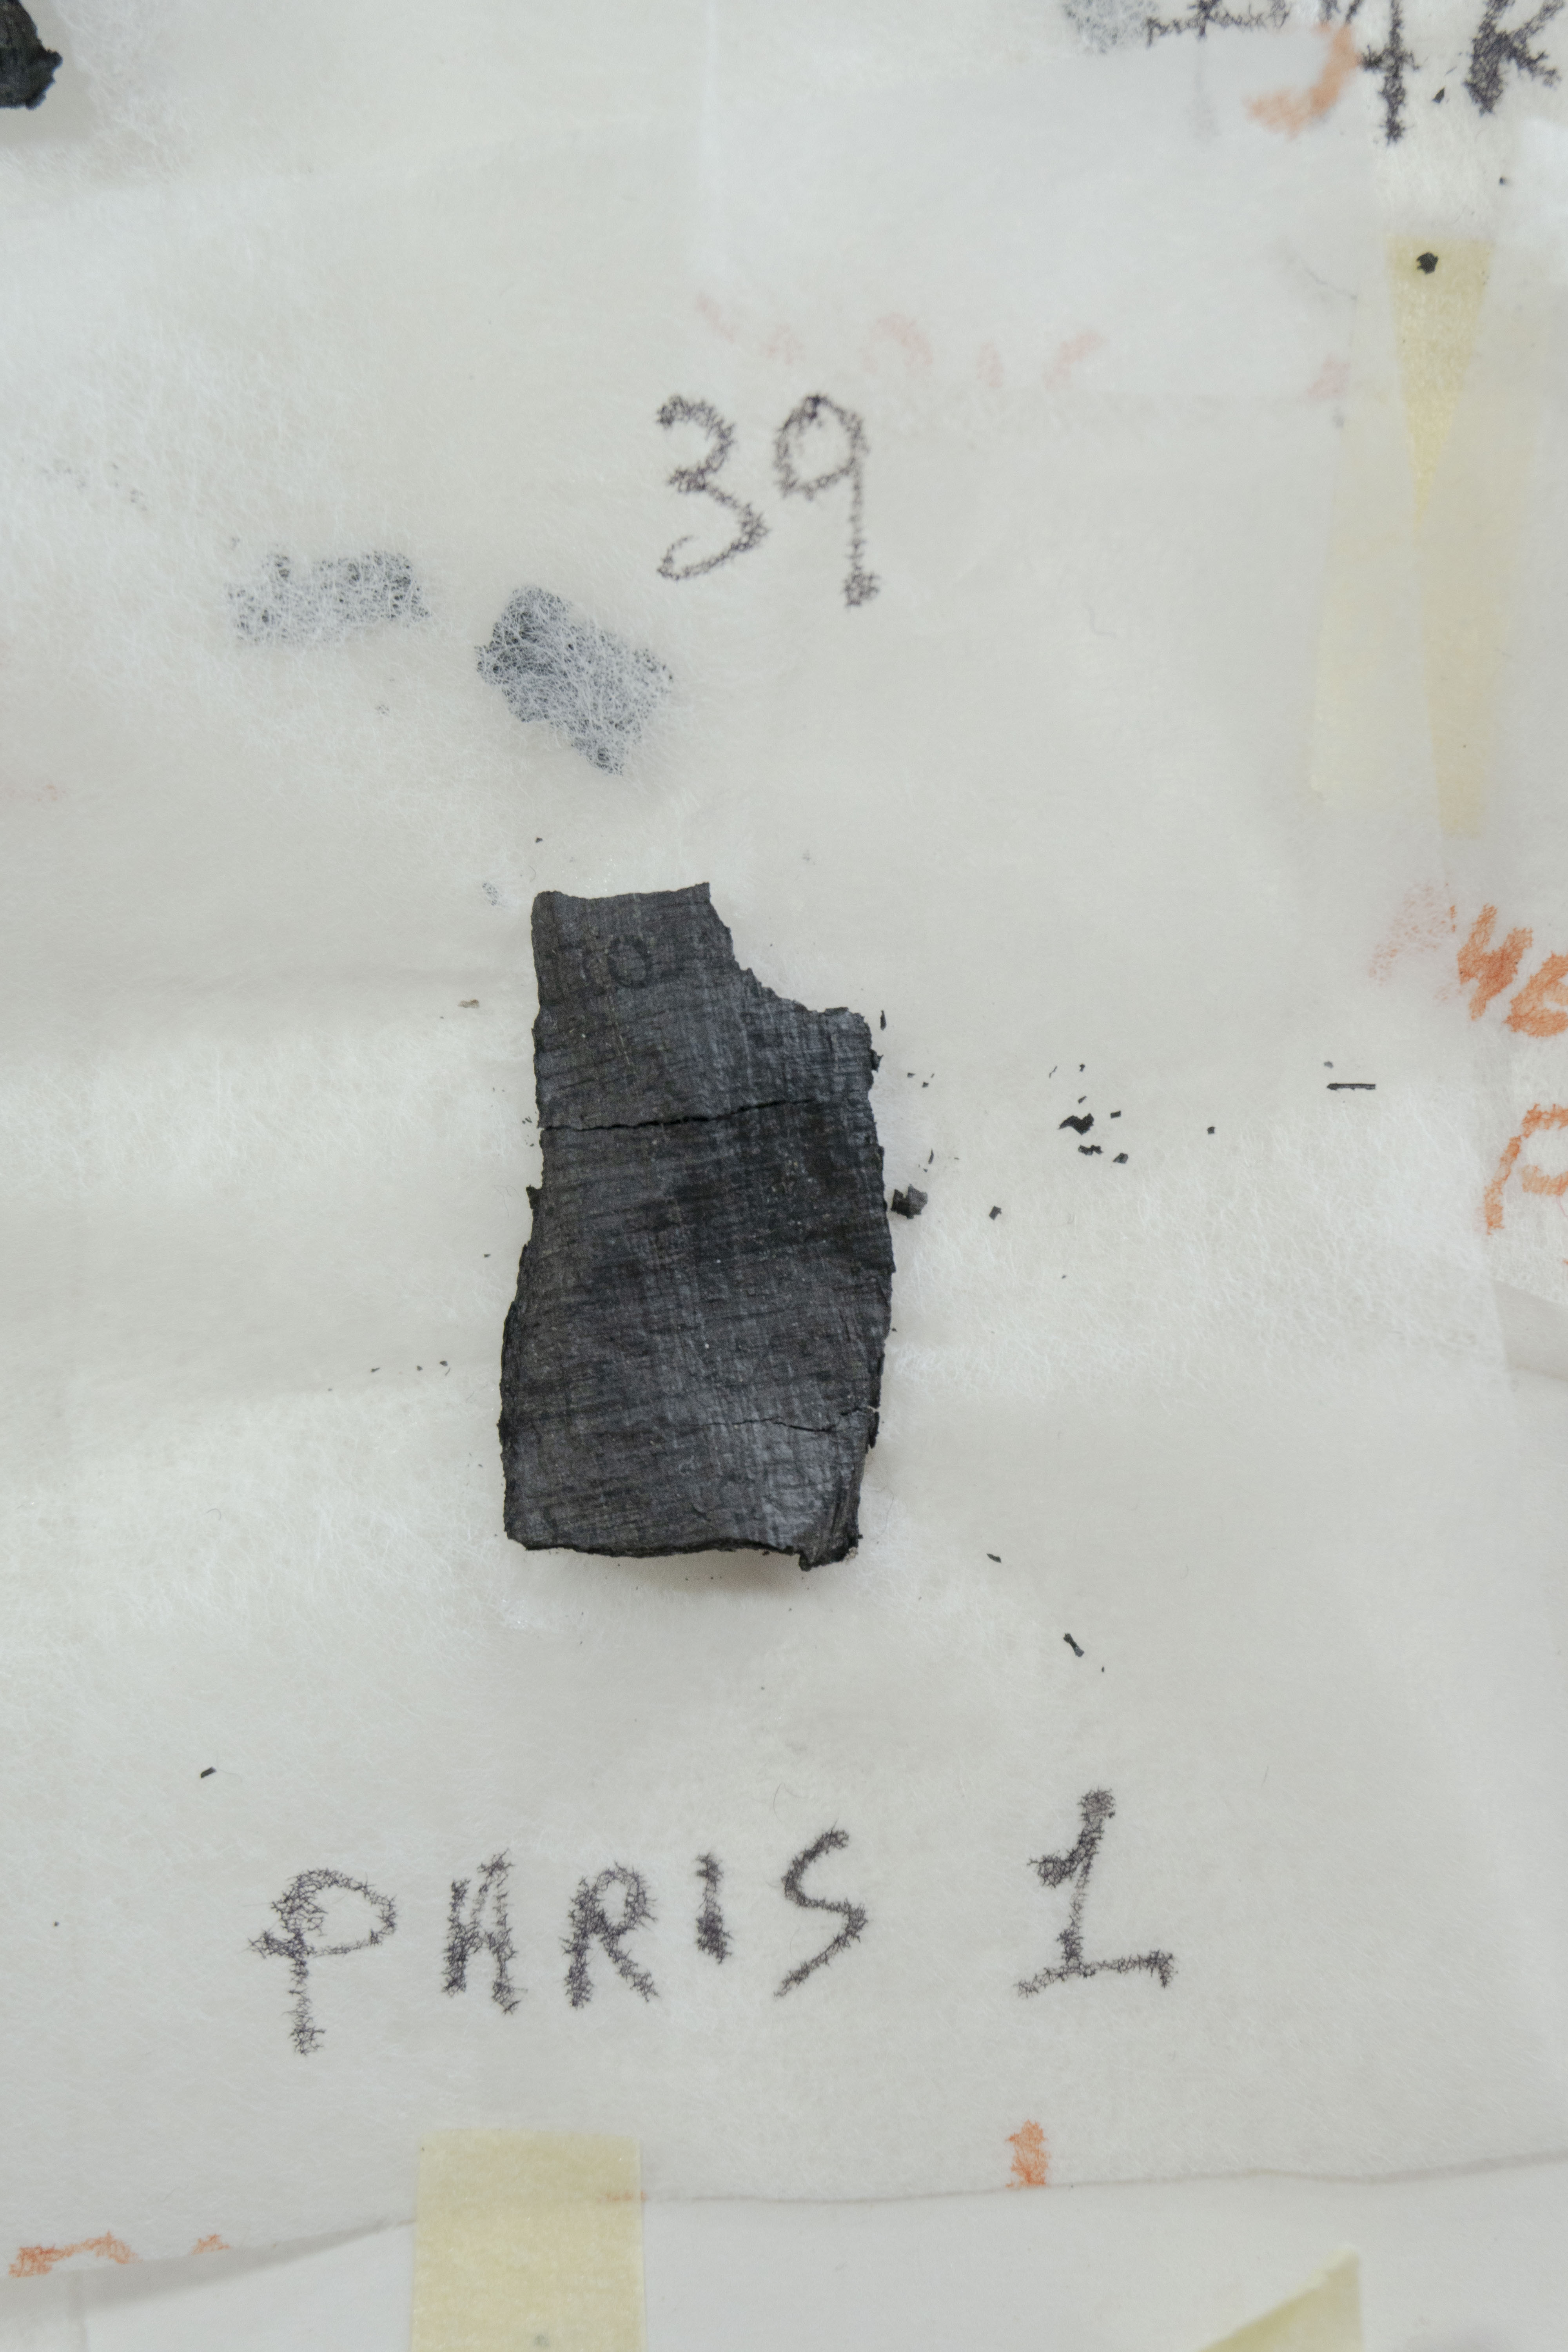 One of four fragments from the Herculaneum Scrolls (Diamond, the UK’s national synchrotron science facility/PA)